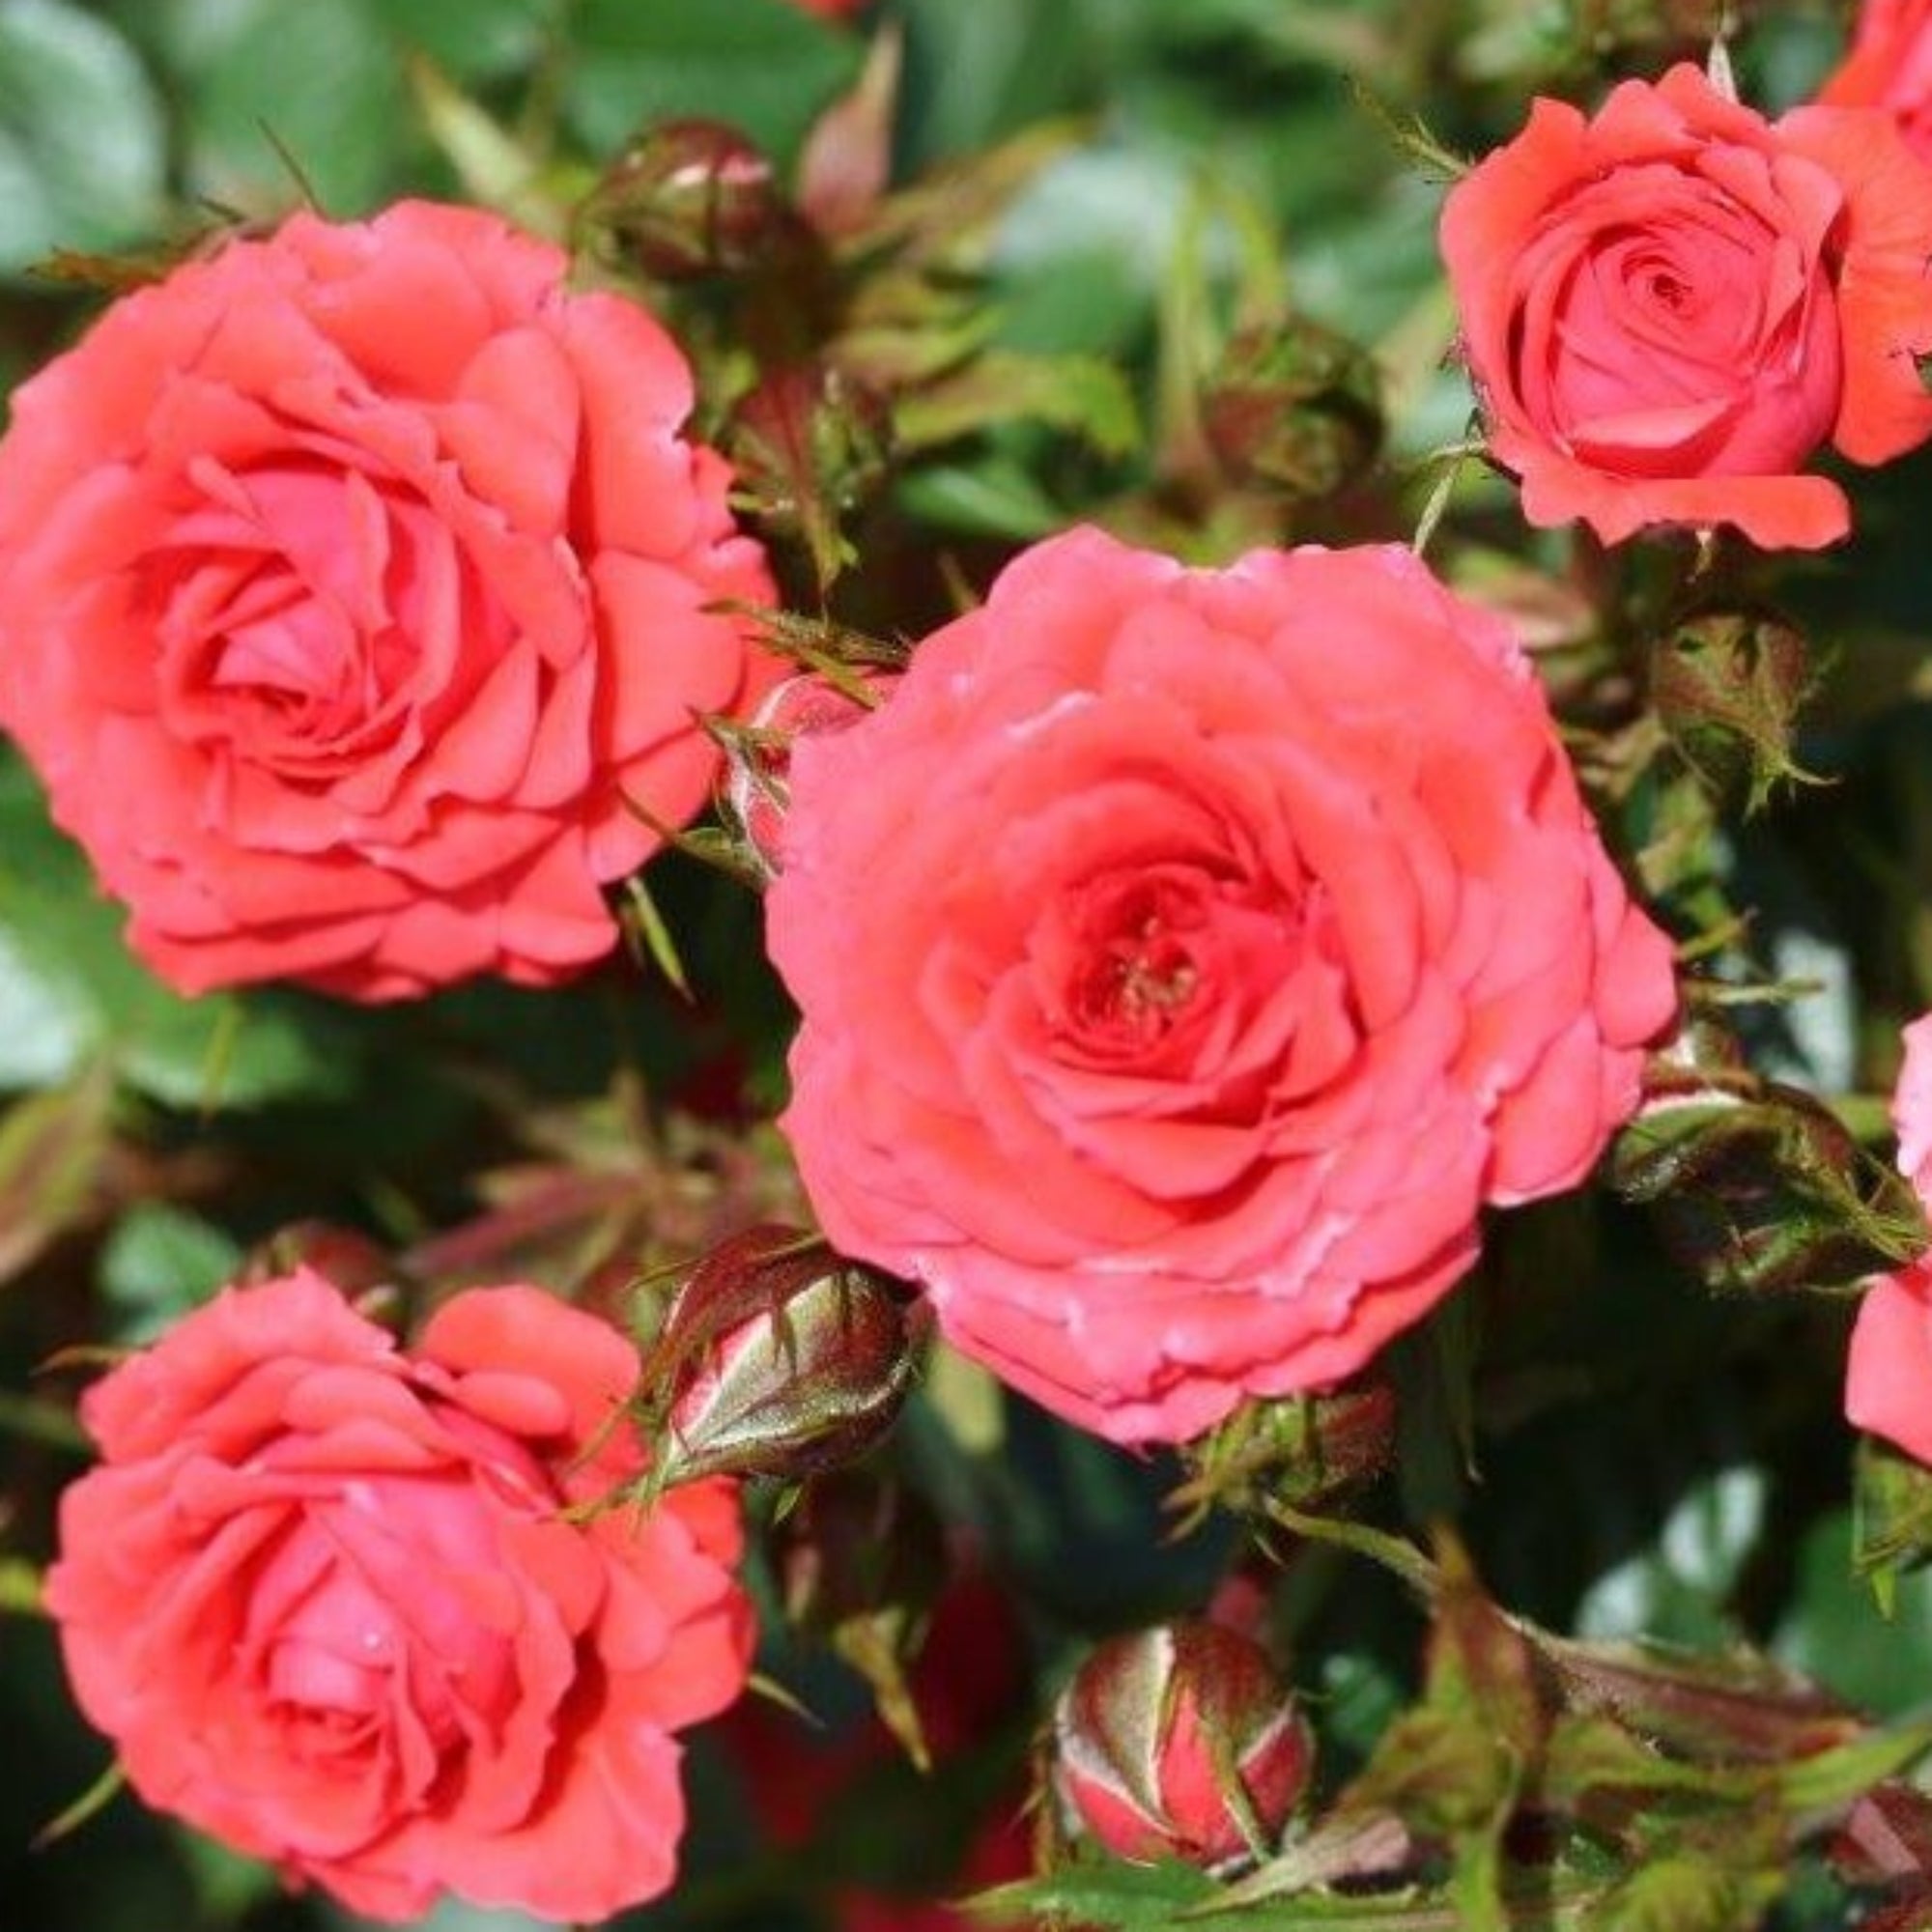 Rose Birthday Wishes | Patio Rose | 4L Potted Rose